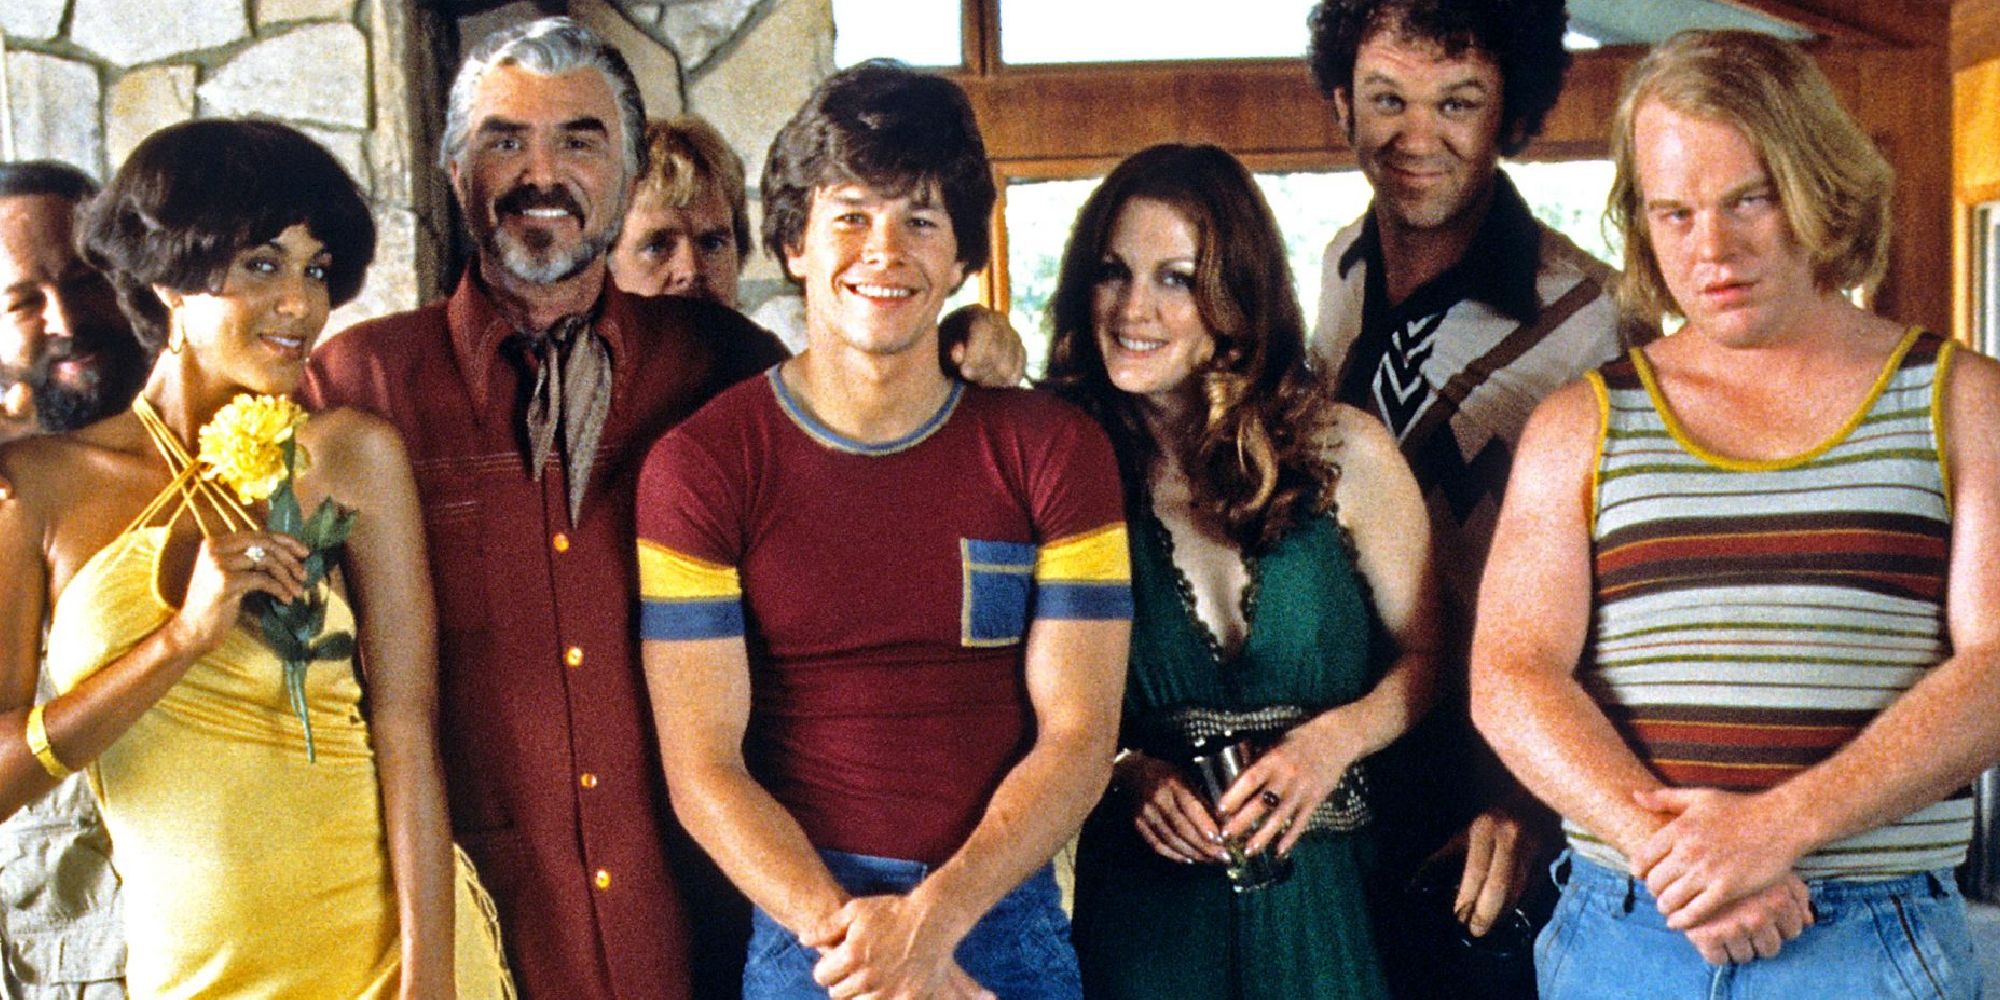 Marh Wahlberg, Burt Reynolds, Philip Seymour Hoffman, John C. Reilly, Julianne Moore, and Nicole Ari Parker posing for a photo together in Boogie Night